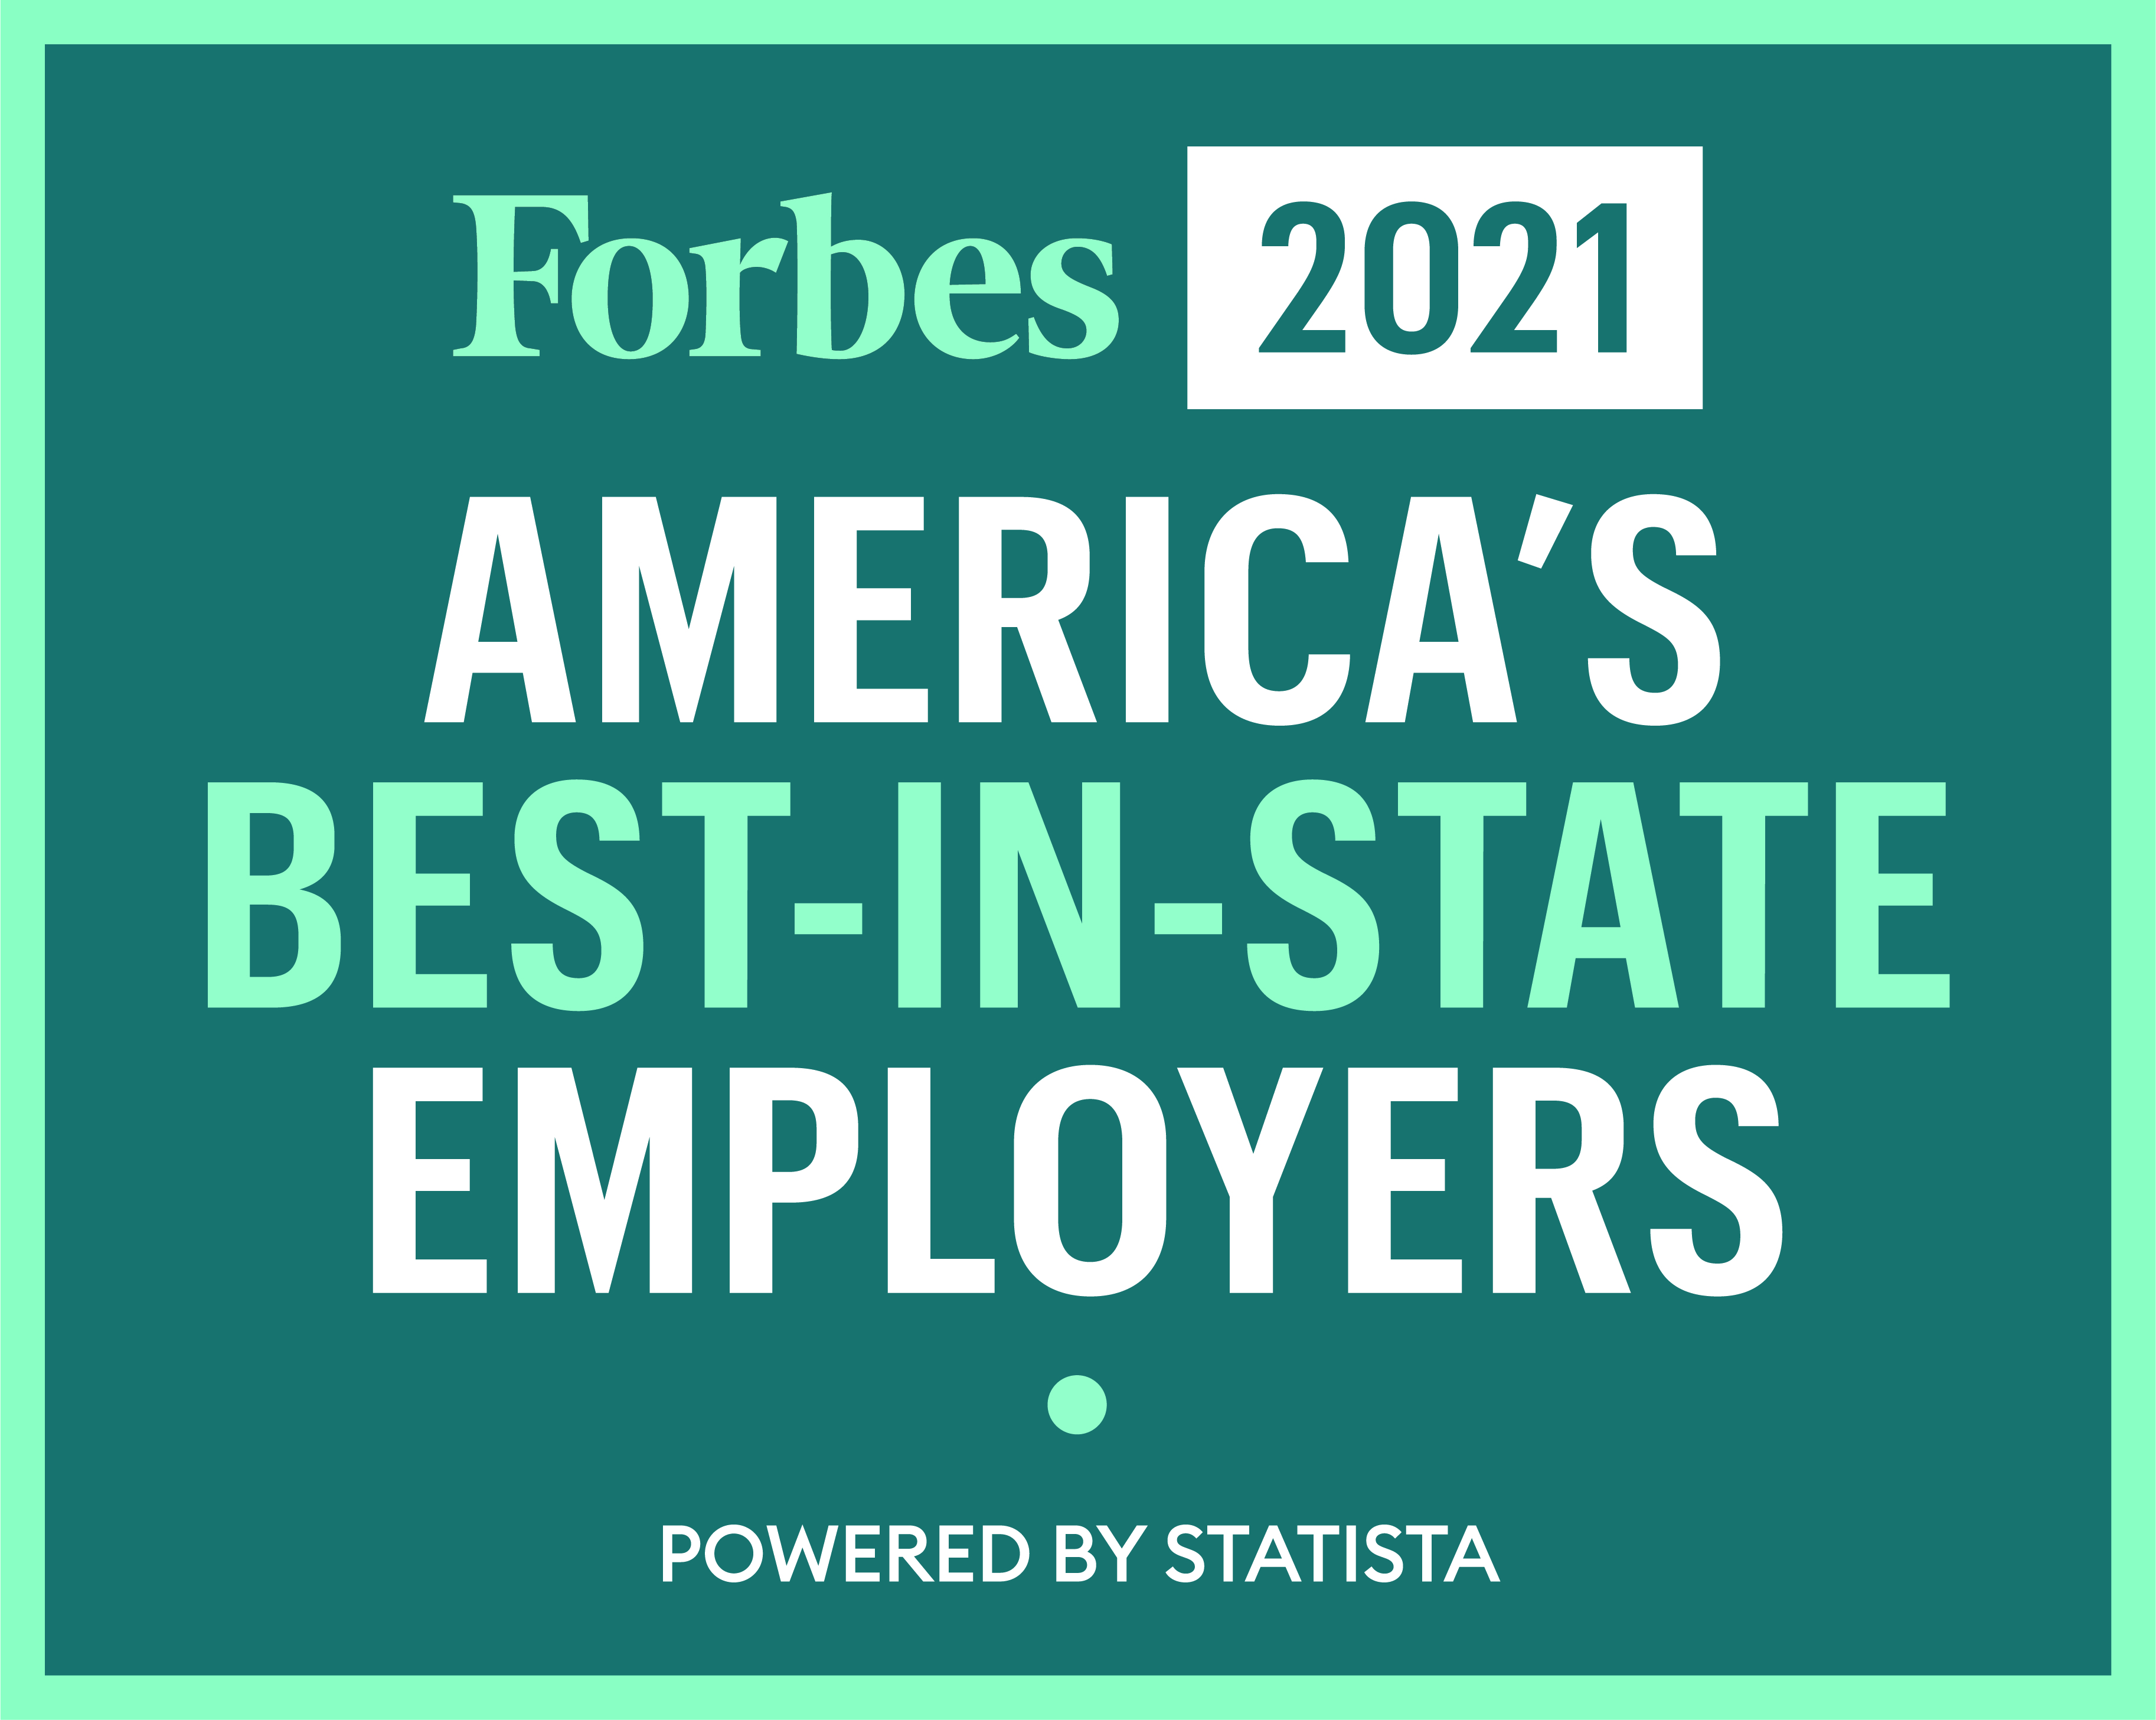 Green Forbes 2021 Best in state employers badge.